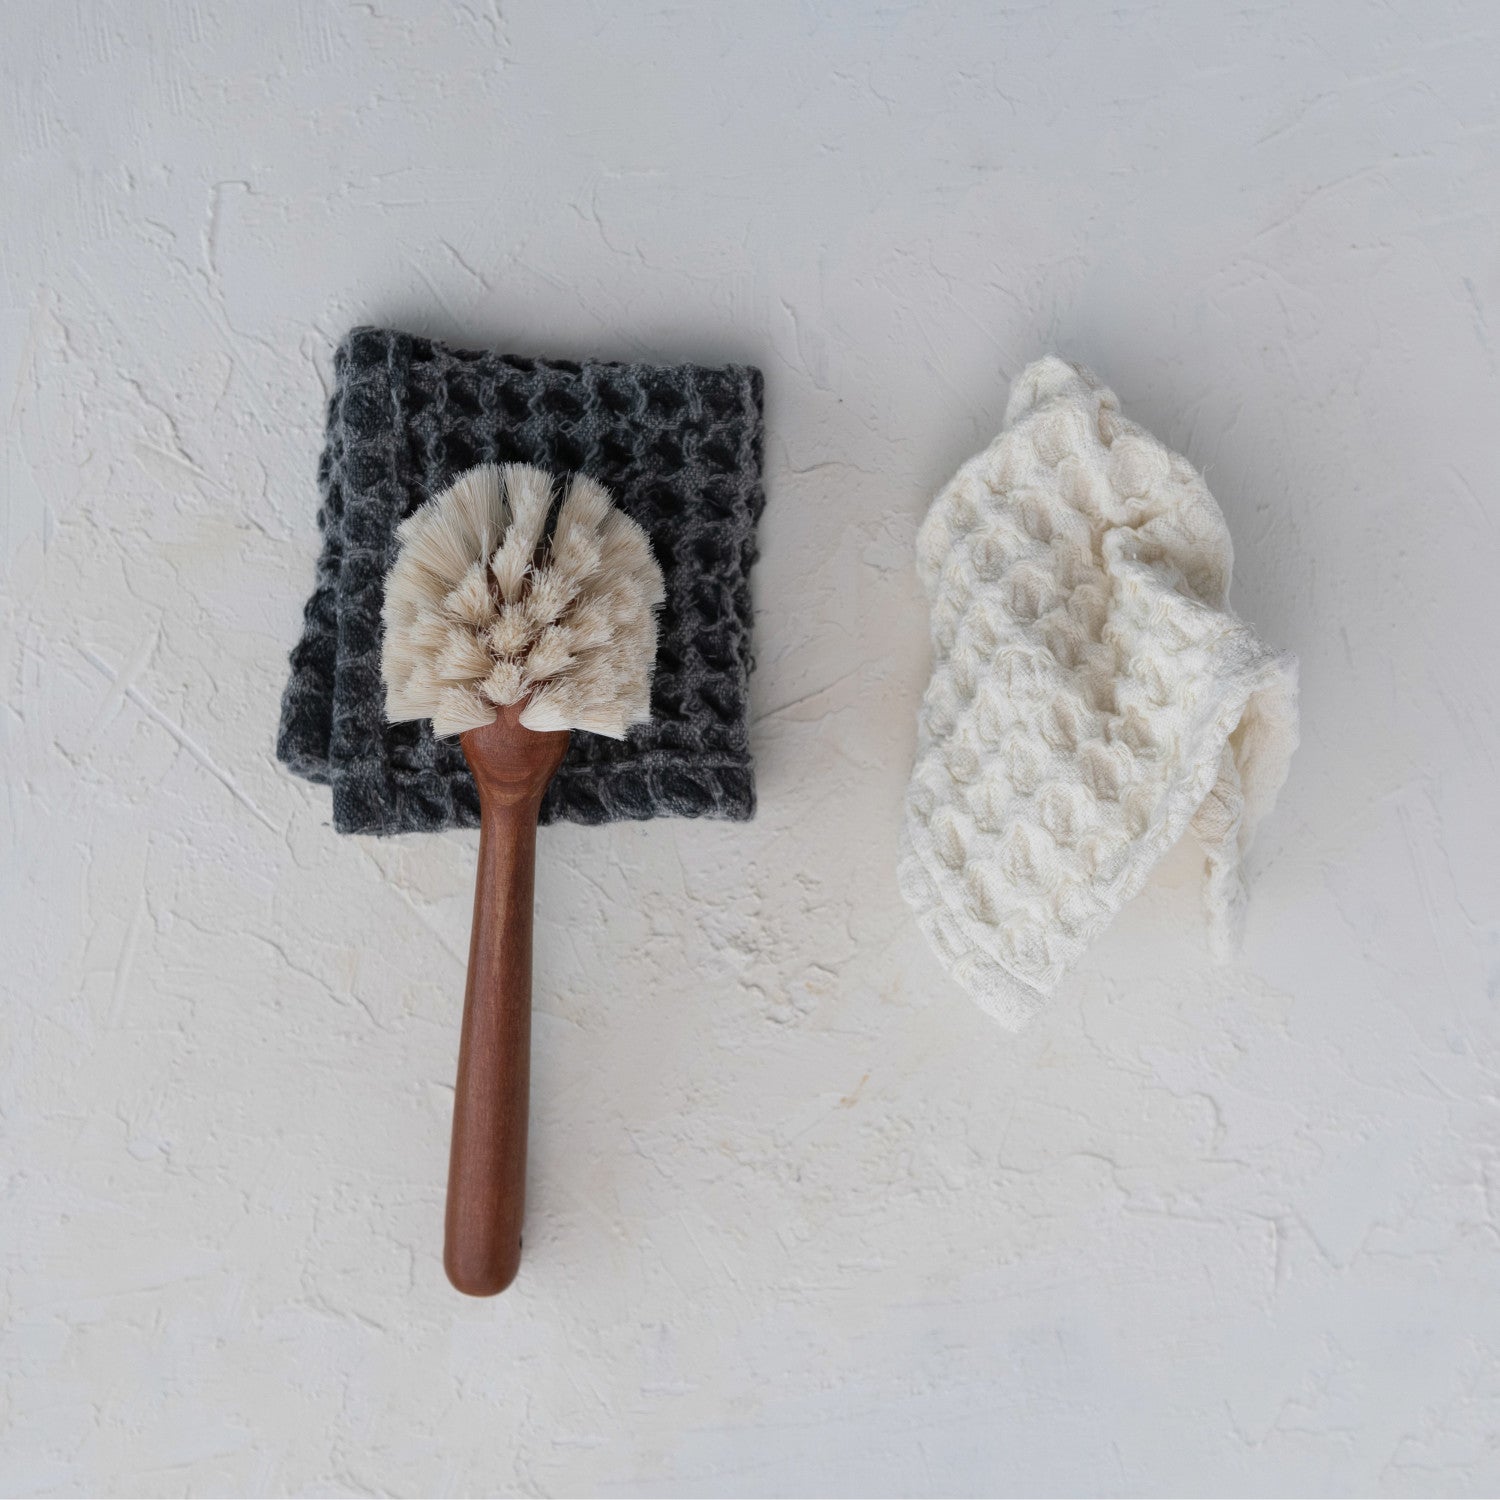 Cotton Waffle Weave Dish Cloths w/ Loops